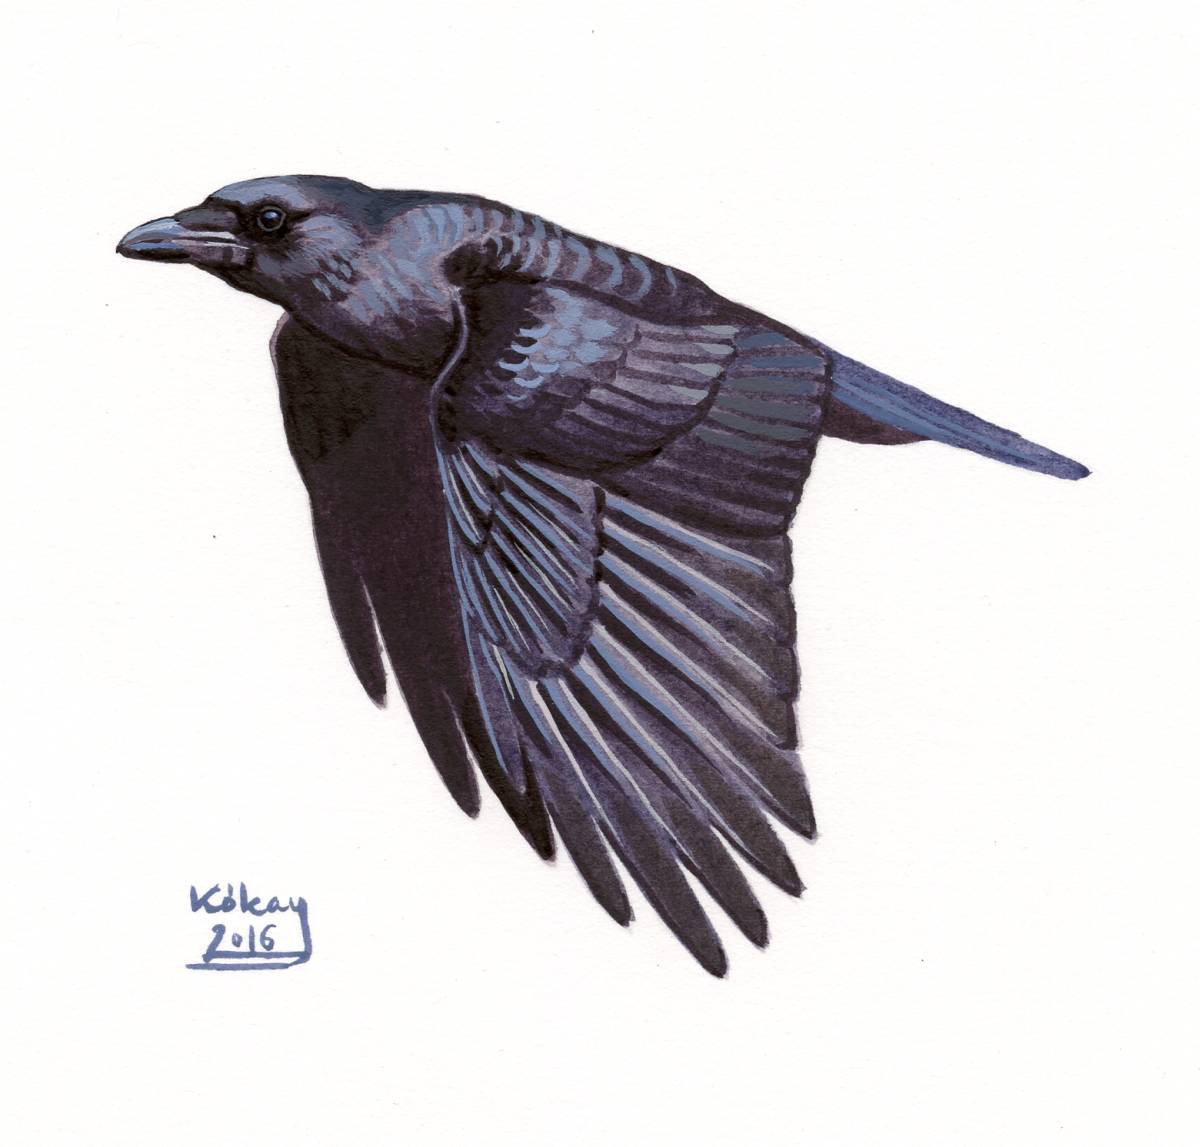 Carrion Crow (Corvus corone), watercolour and bodycolour on paper